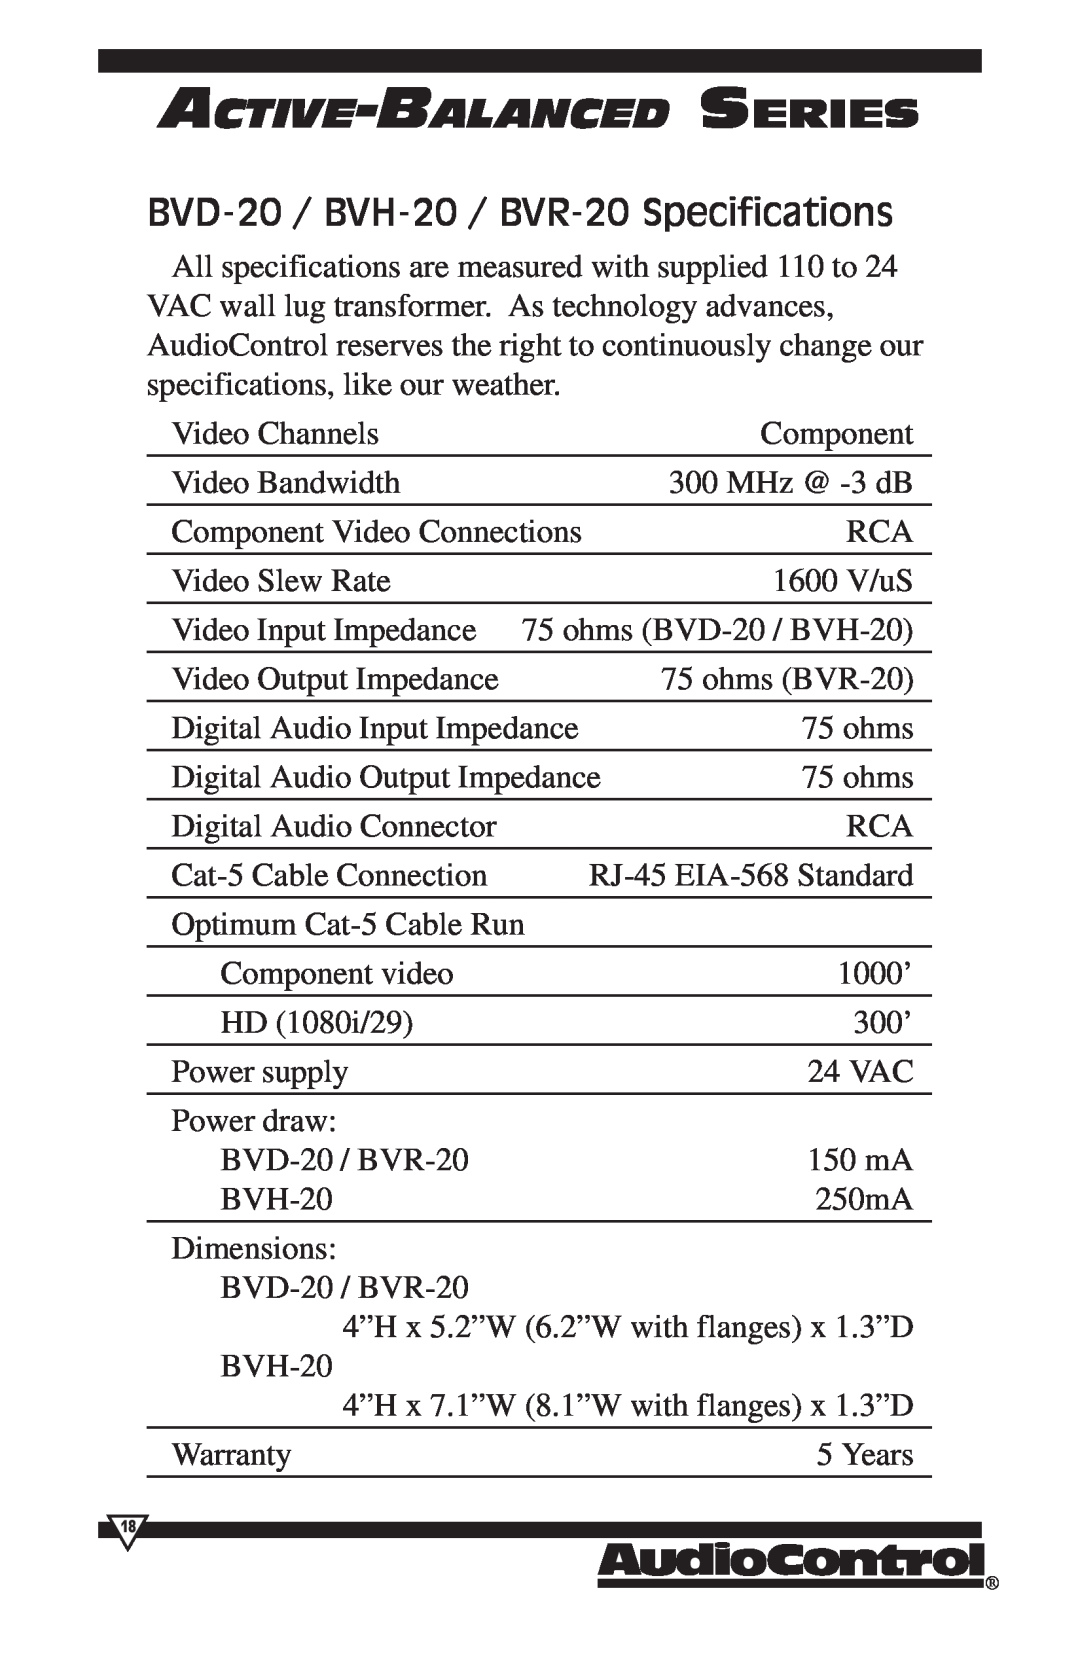 HomeTech operation manual BVD-20 / BVH-20 / BVR-20Specifications, Active-Balanced Series 